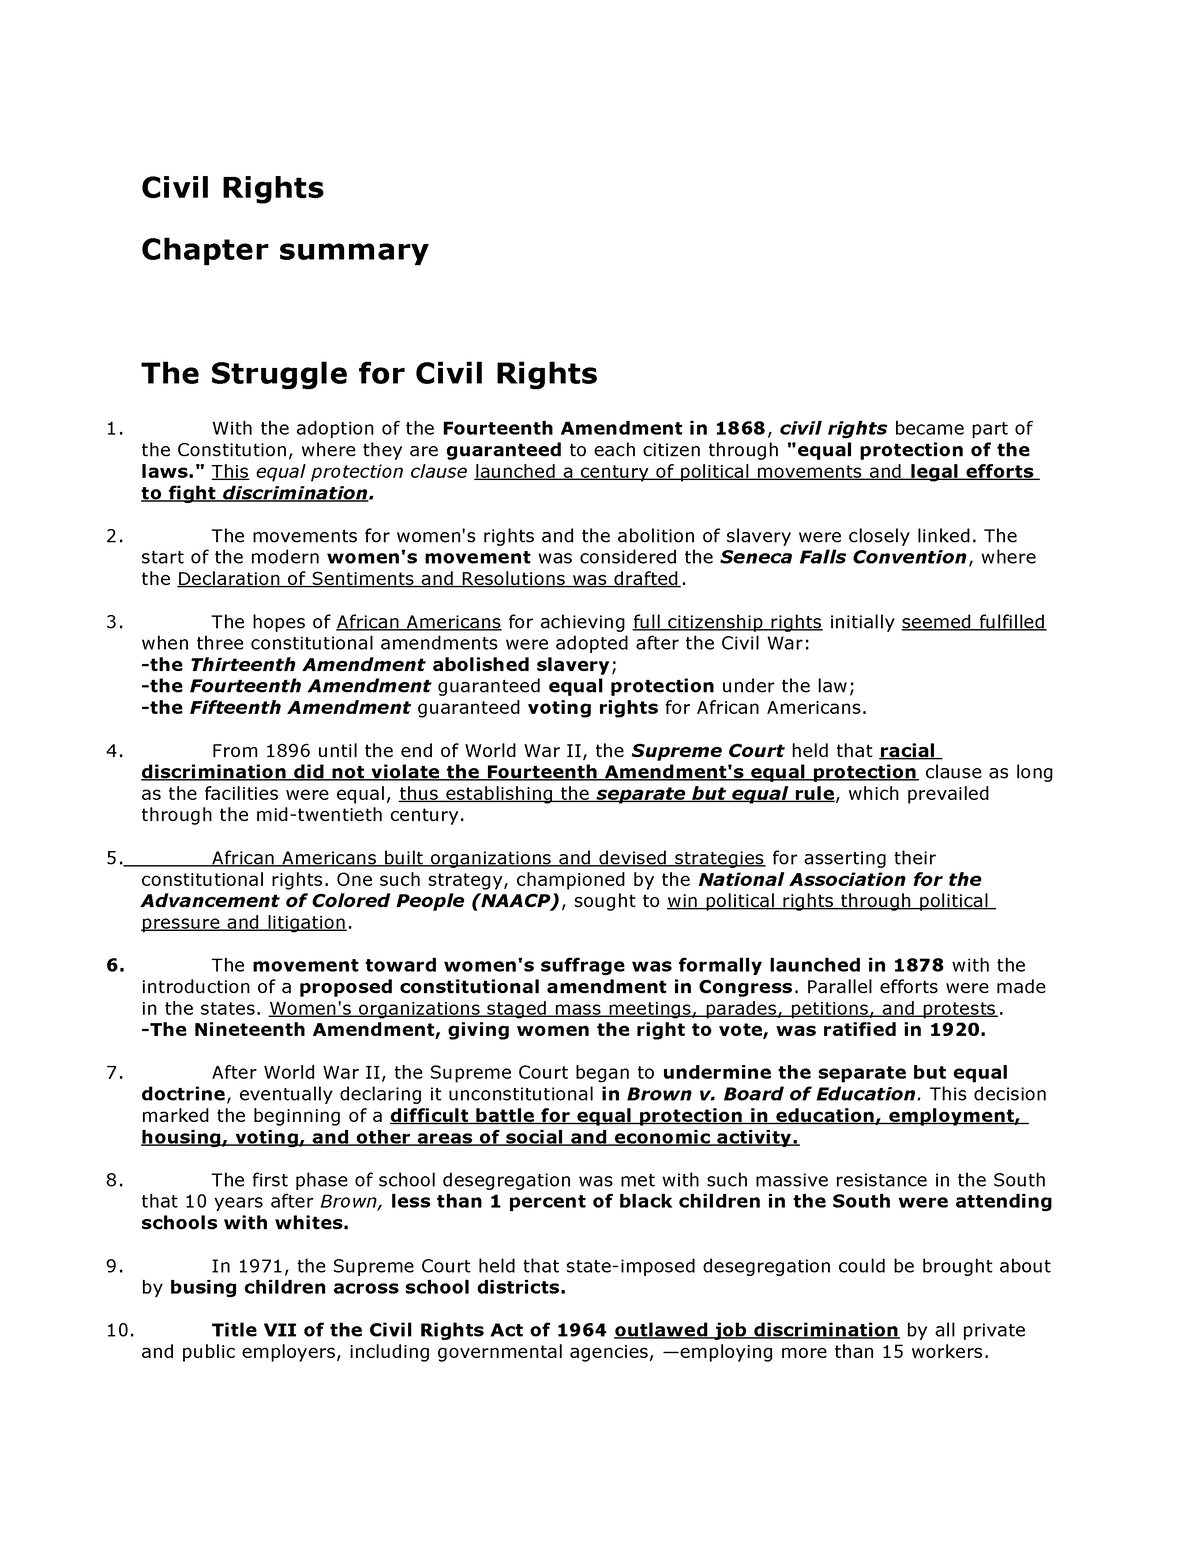 Chapter 5 Civil Rights Summary Civil Rights Chapter Summary The